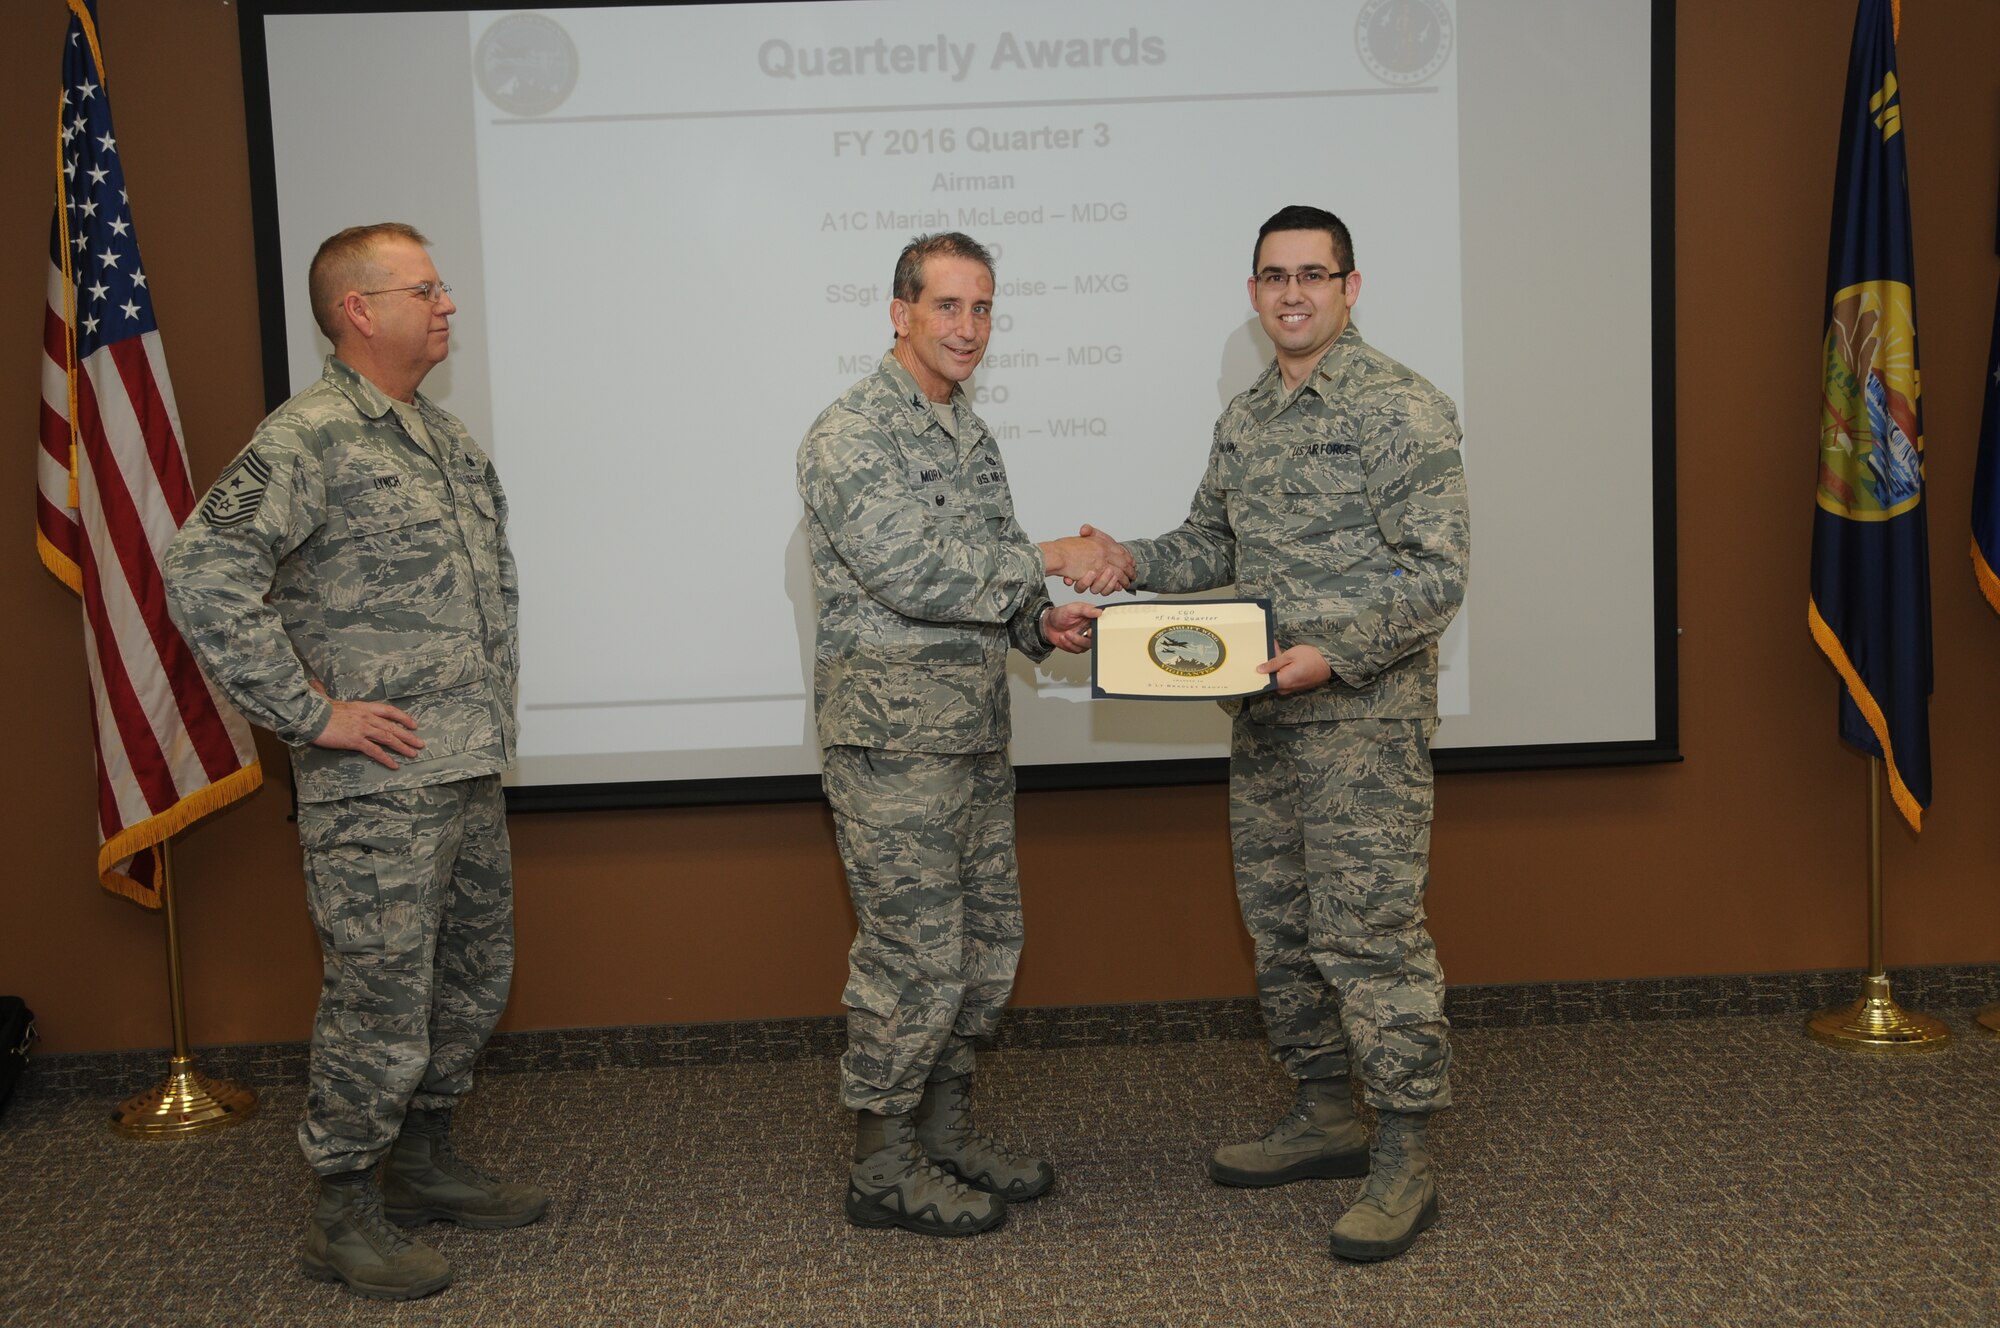 120th Airlift Wing Vice Commander Col. Thomas Mora and 120th AW Command Chief Master Sgt. Steven Lynch presented the Fiscal Year 2016 3rd quarter award winners for the 120th Airlift Wing of the Montana Air National Guard during the Stand-up Briefing held in the Larsen Room of the wing headquarters building Nov. 4, 2016. 120th Wing Headquarters Squadron Budget Officer 2nd Lt. Bradley Gauvin received the Company Grade Officer of the Quarter Award.